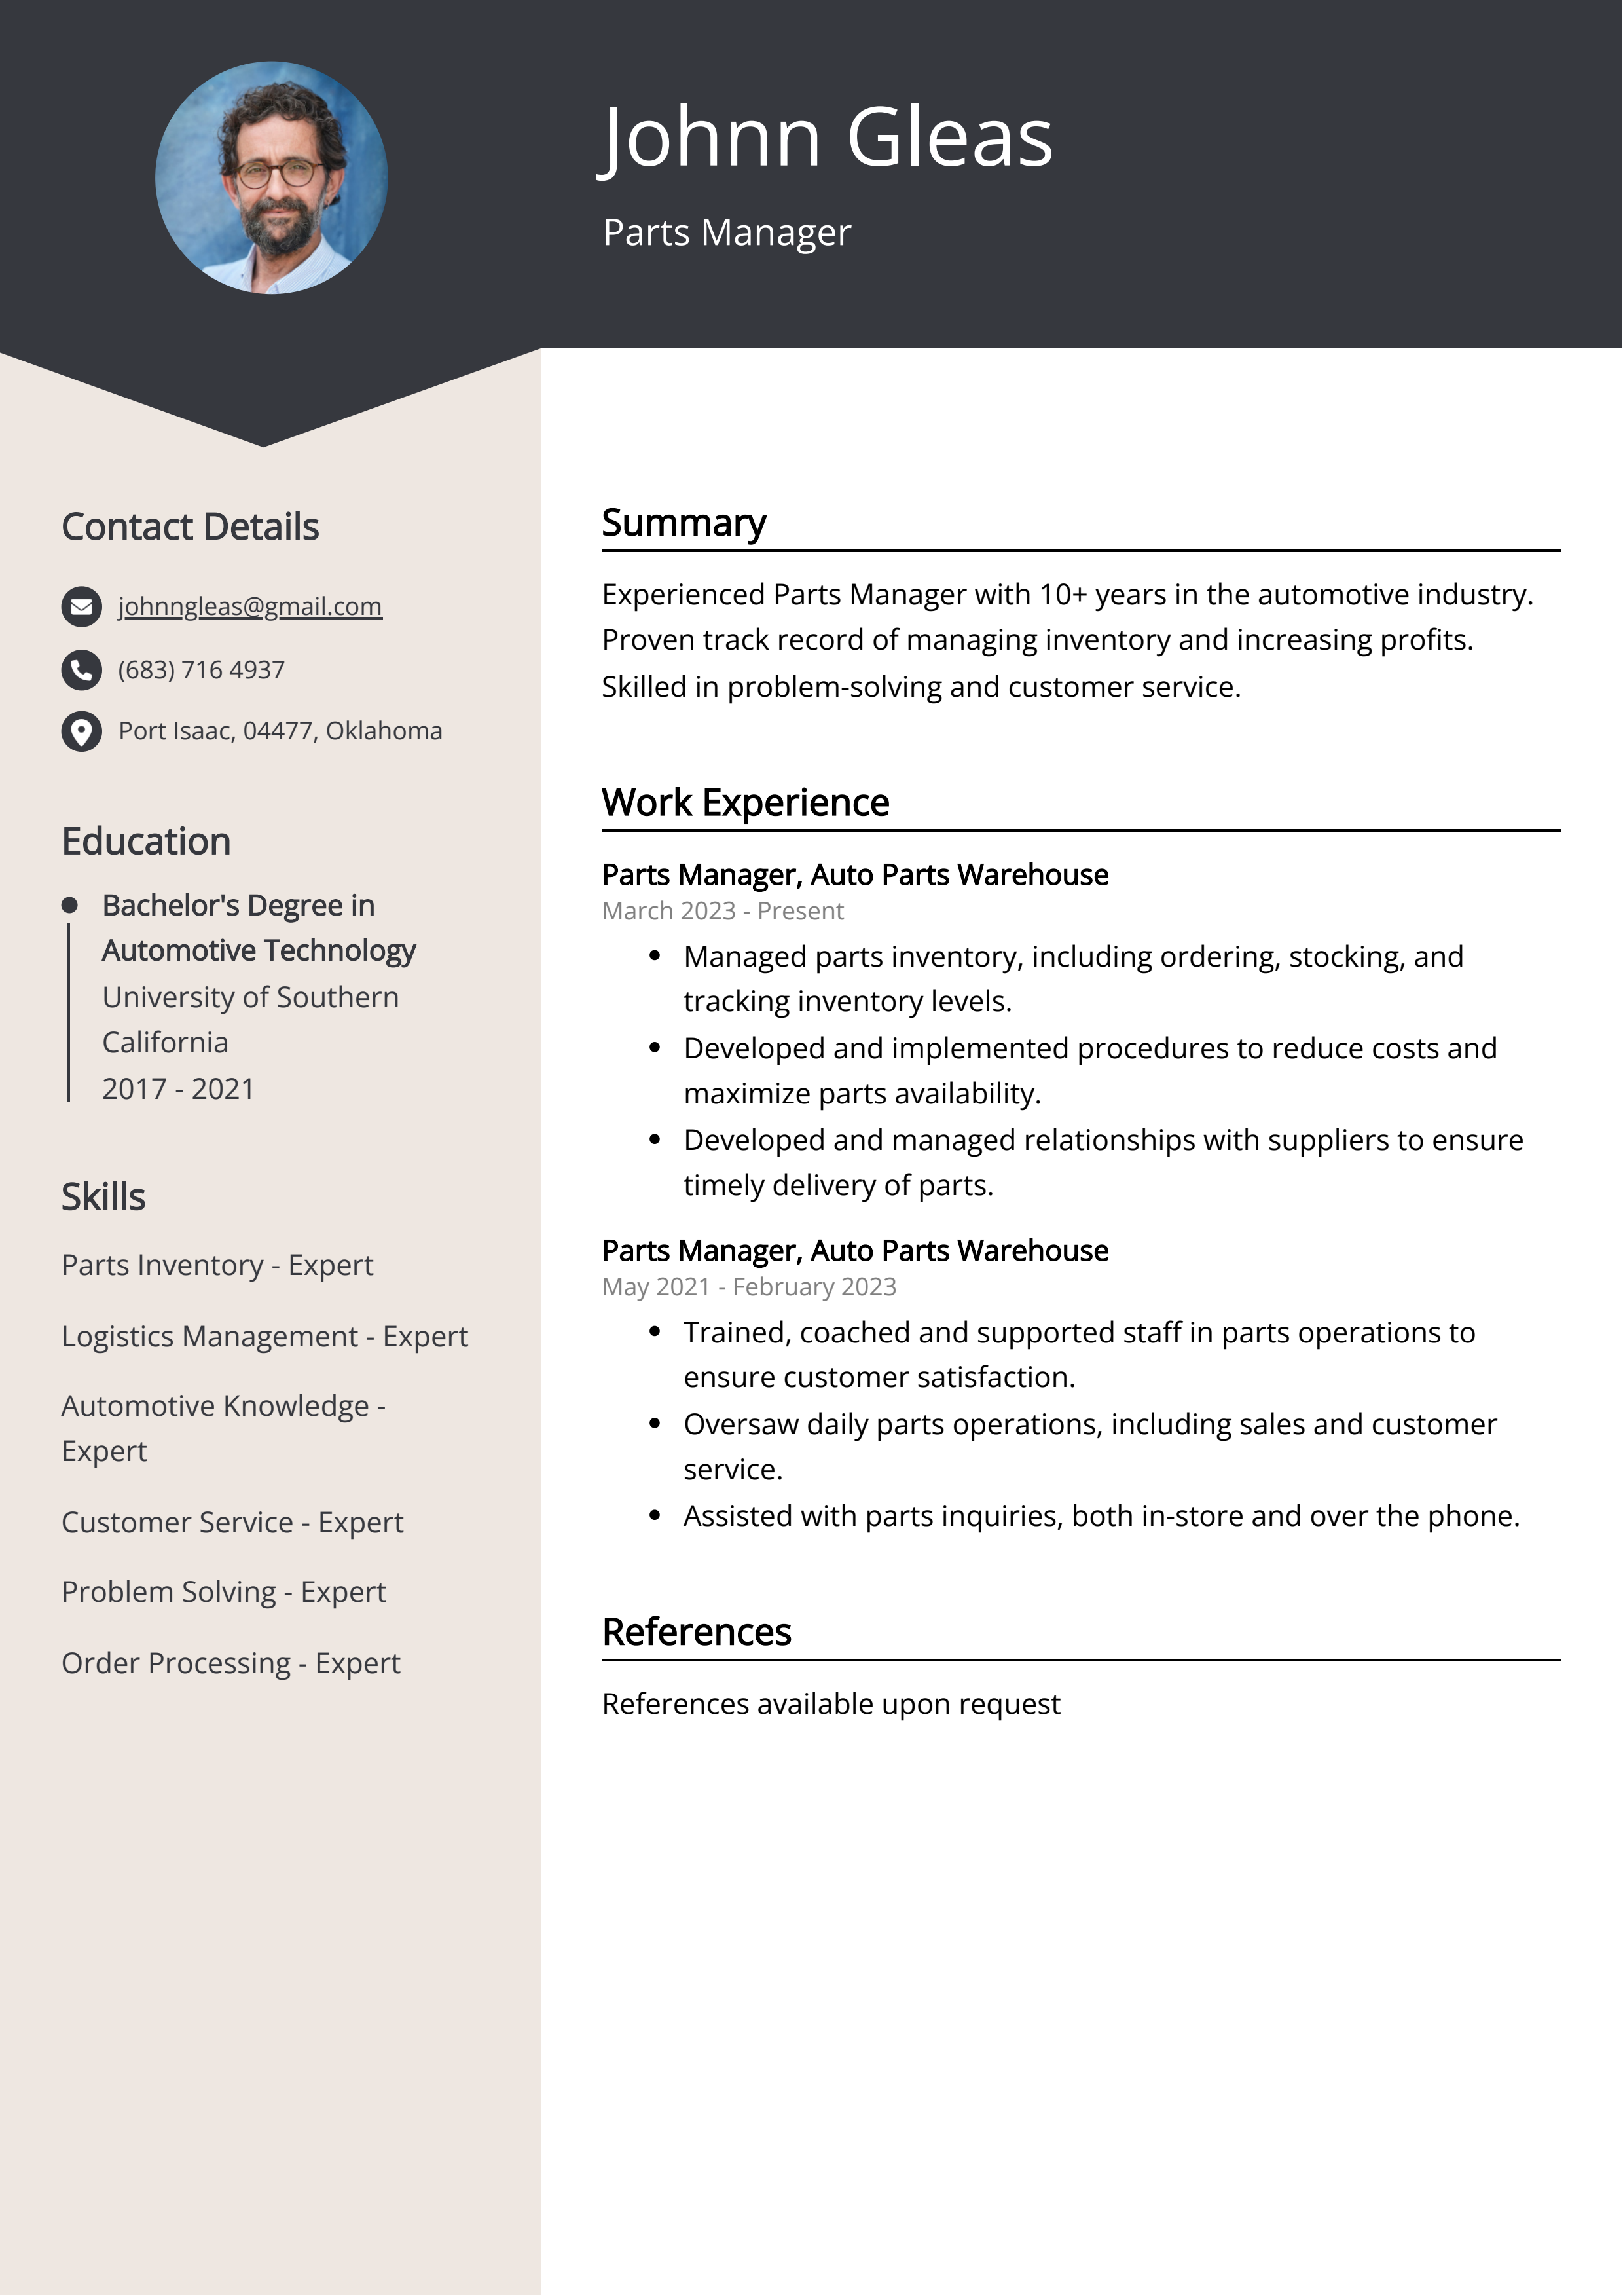 Parts Manager CV Example